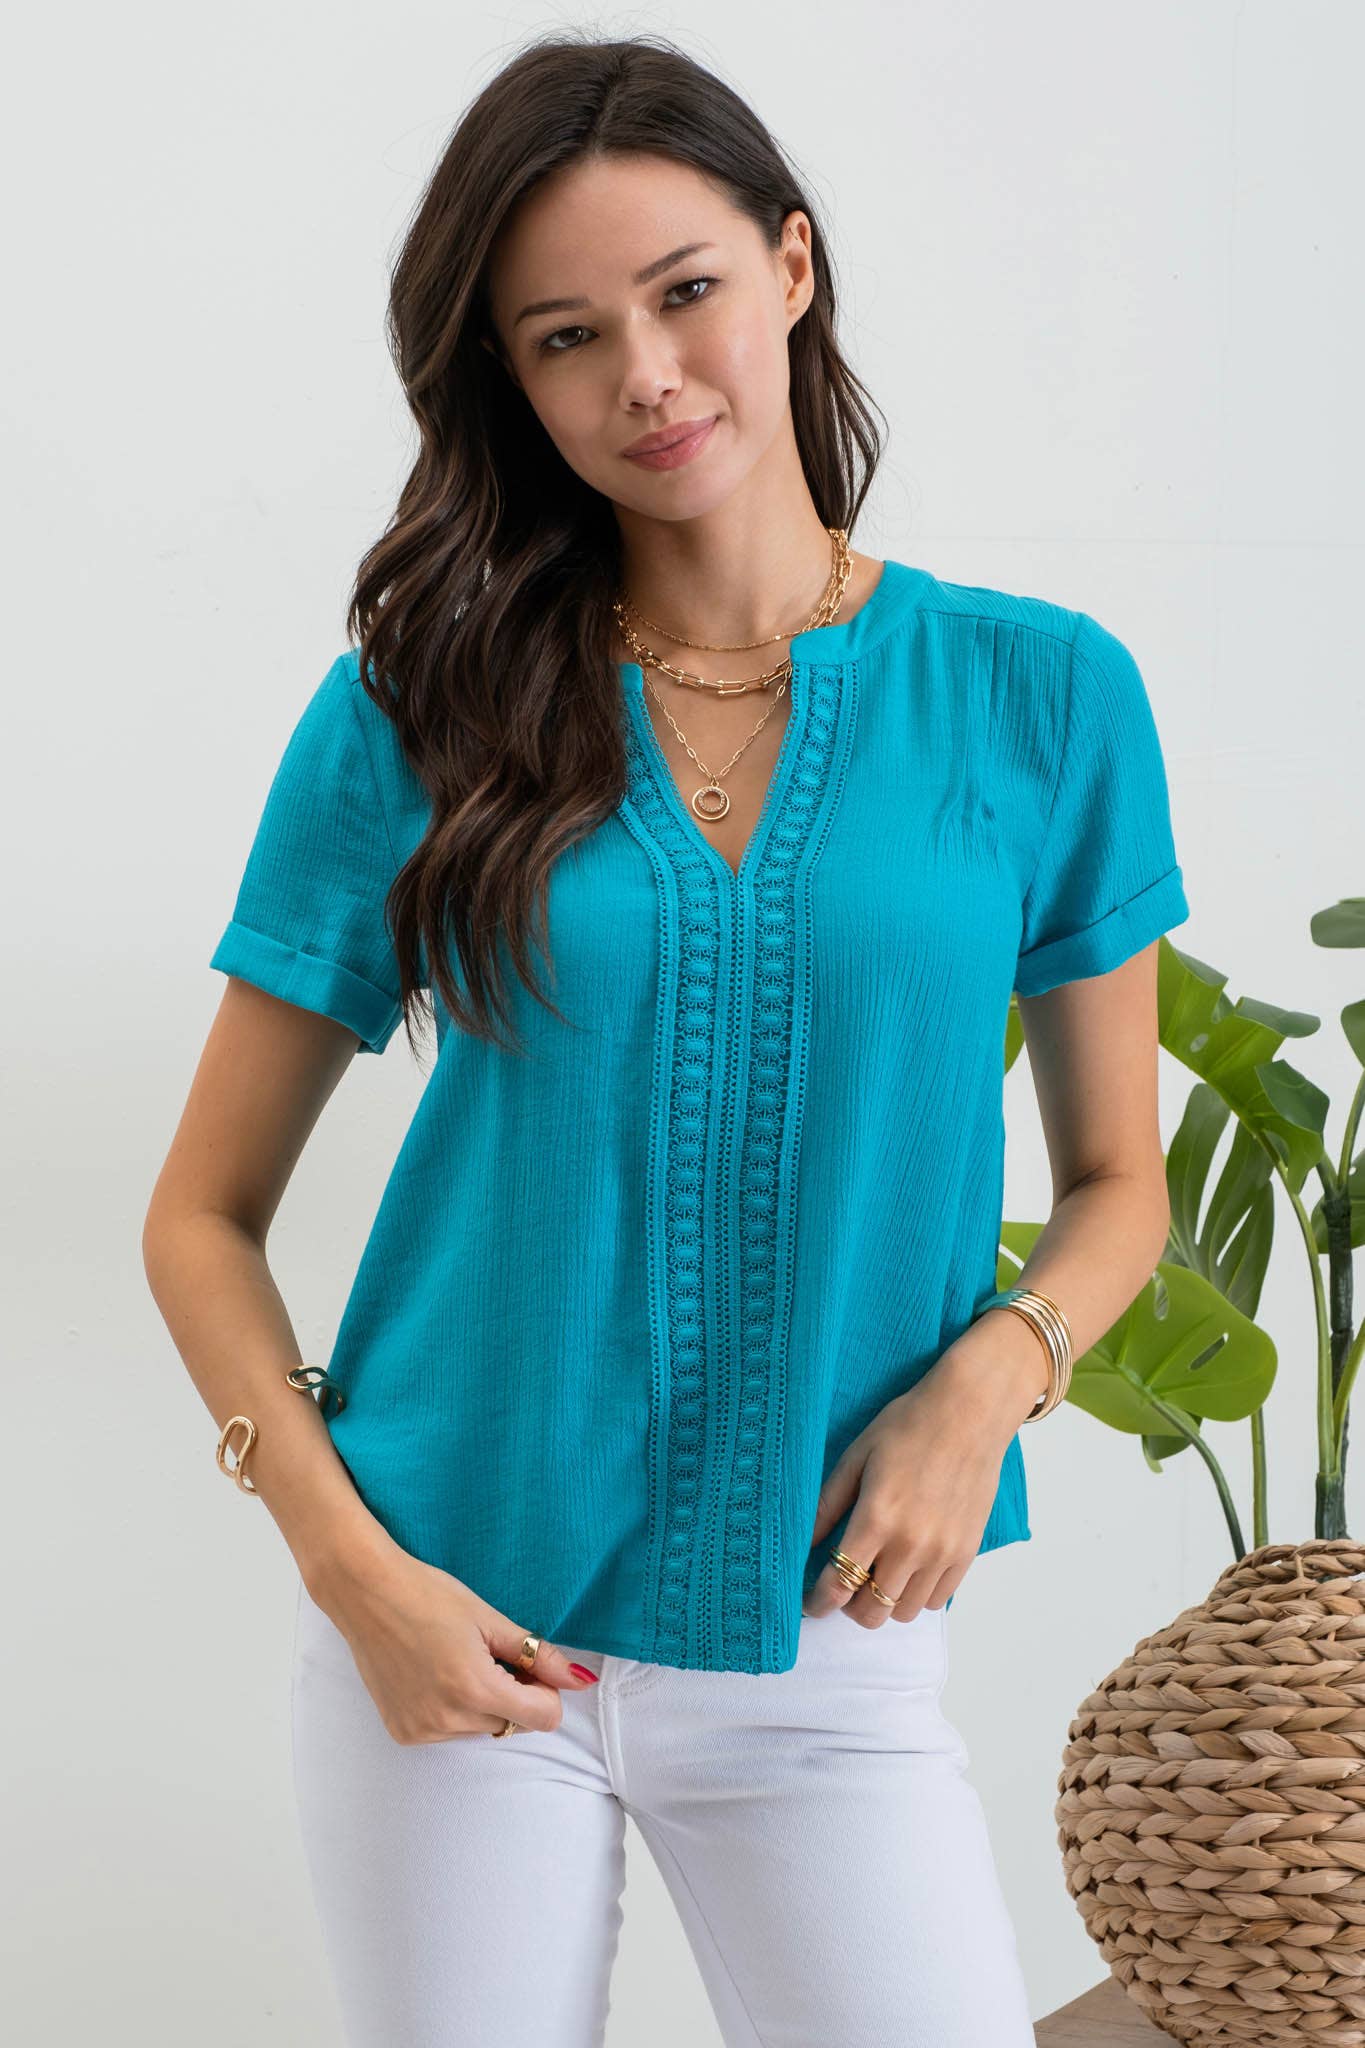 Summer Lace Top in Teal